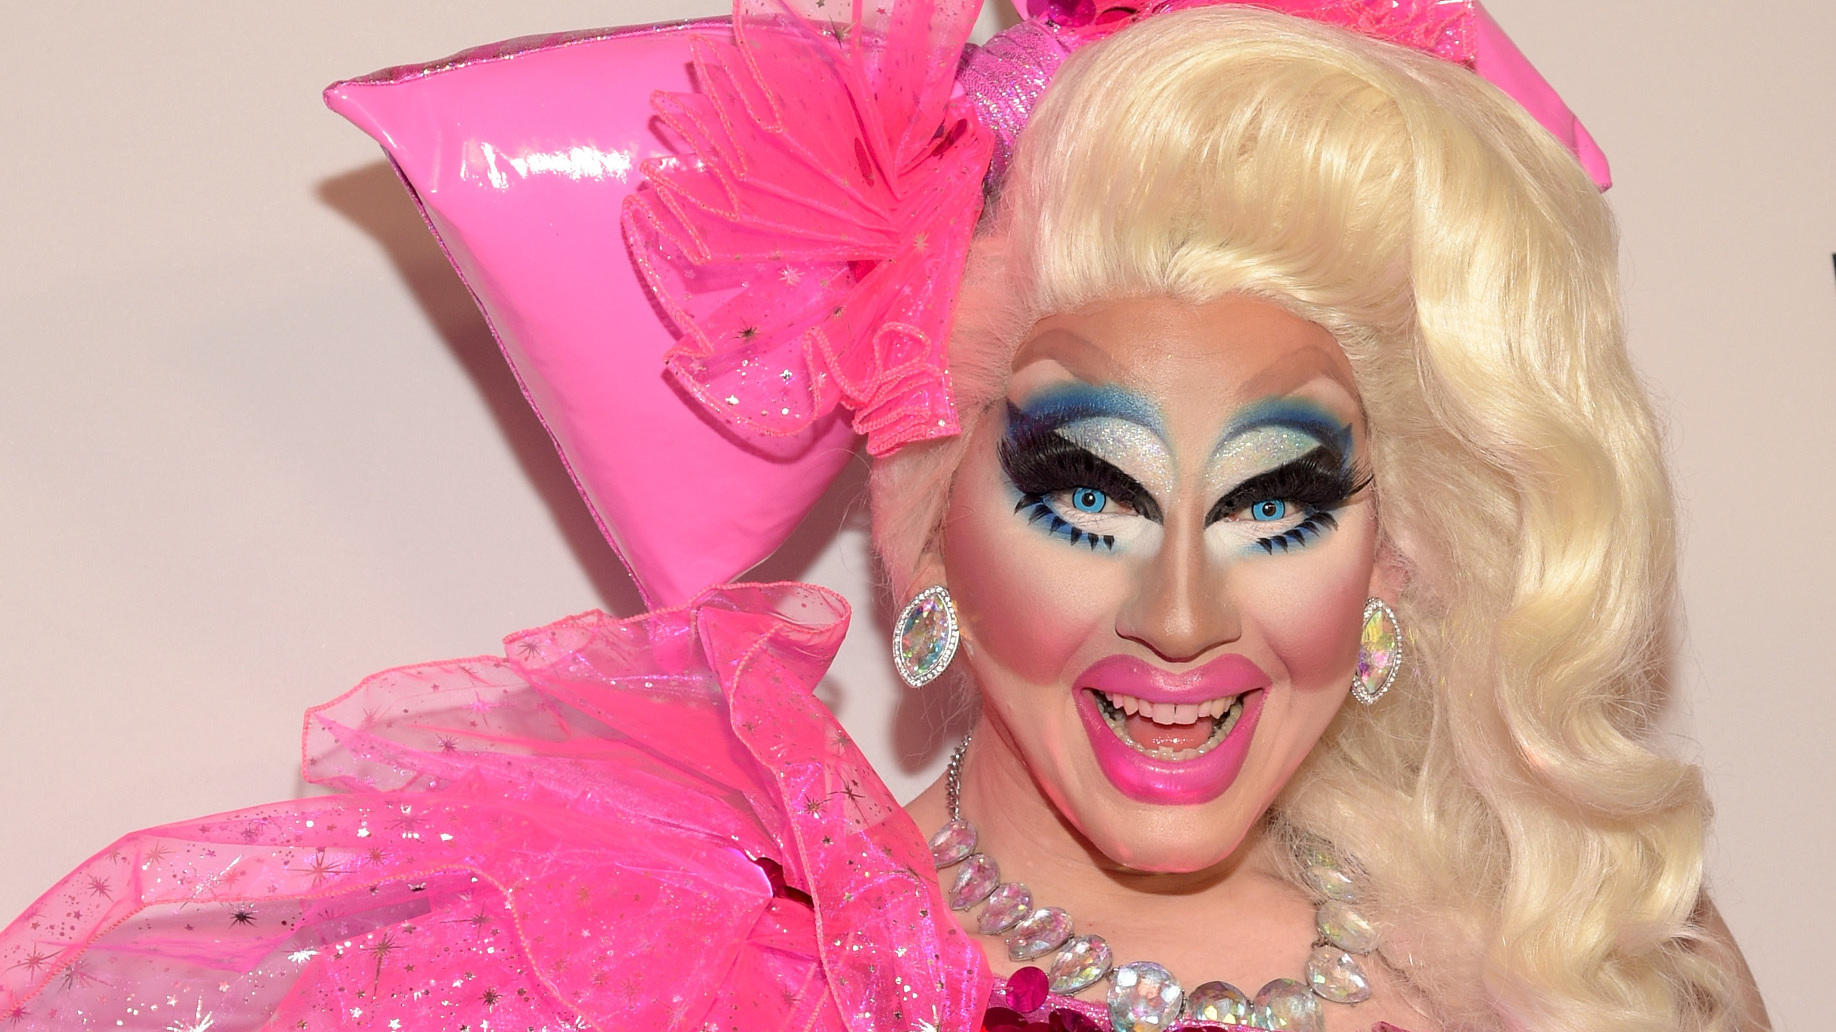 Trixie Mattel attends the RuPaul's Drag Race finale on May 19, 2015 in...